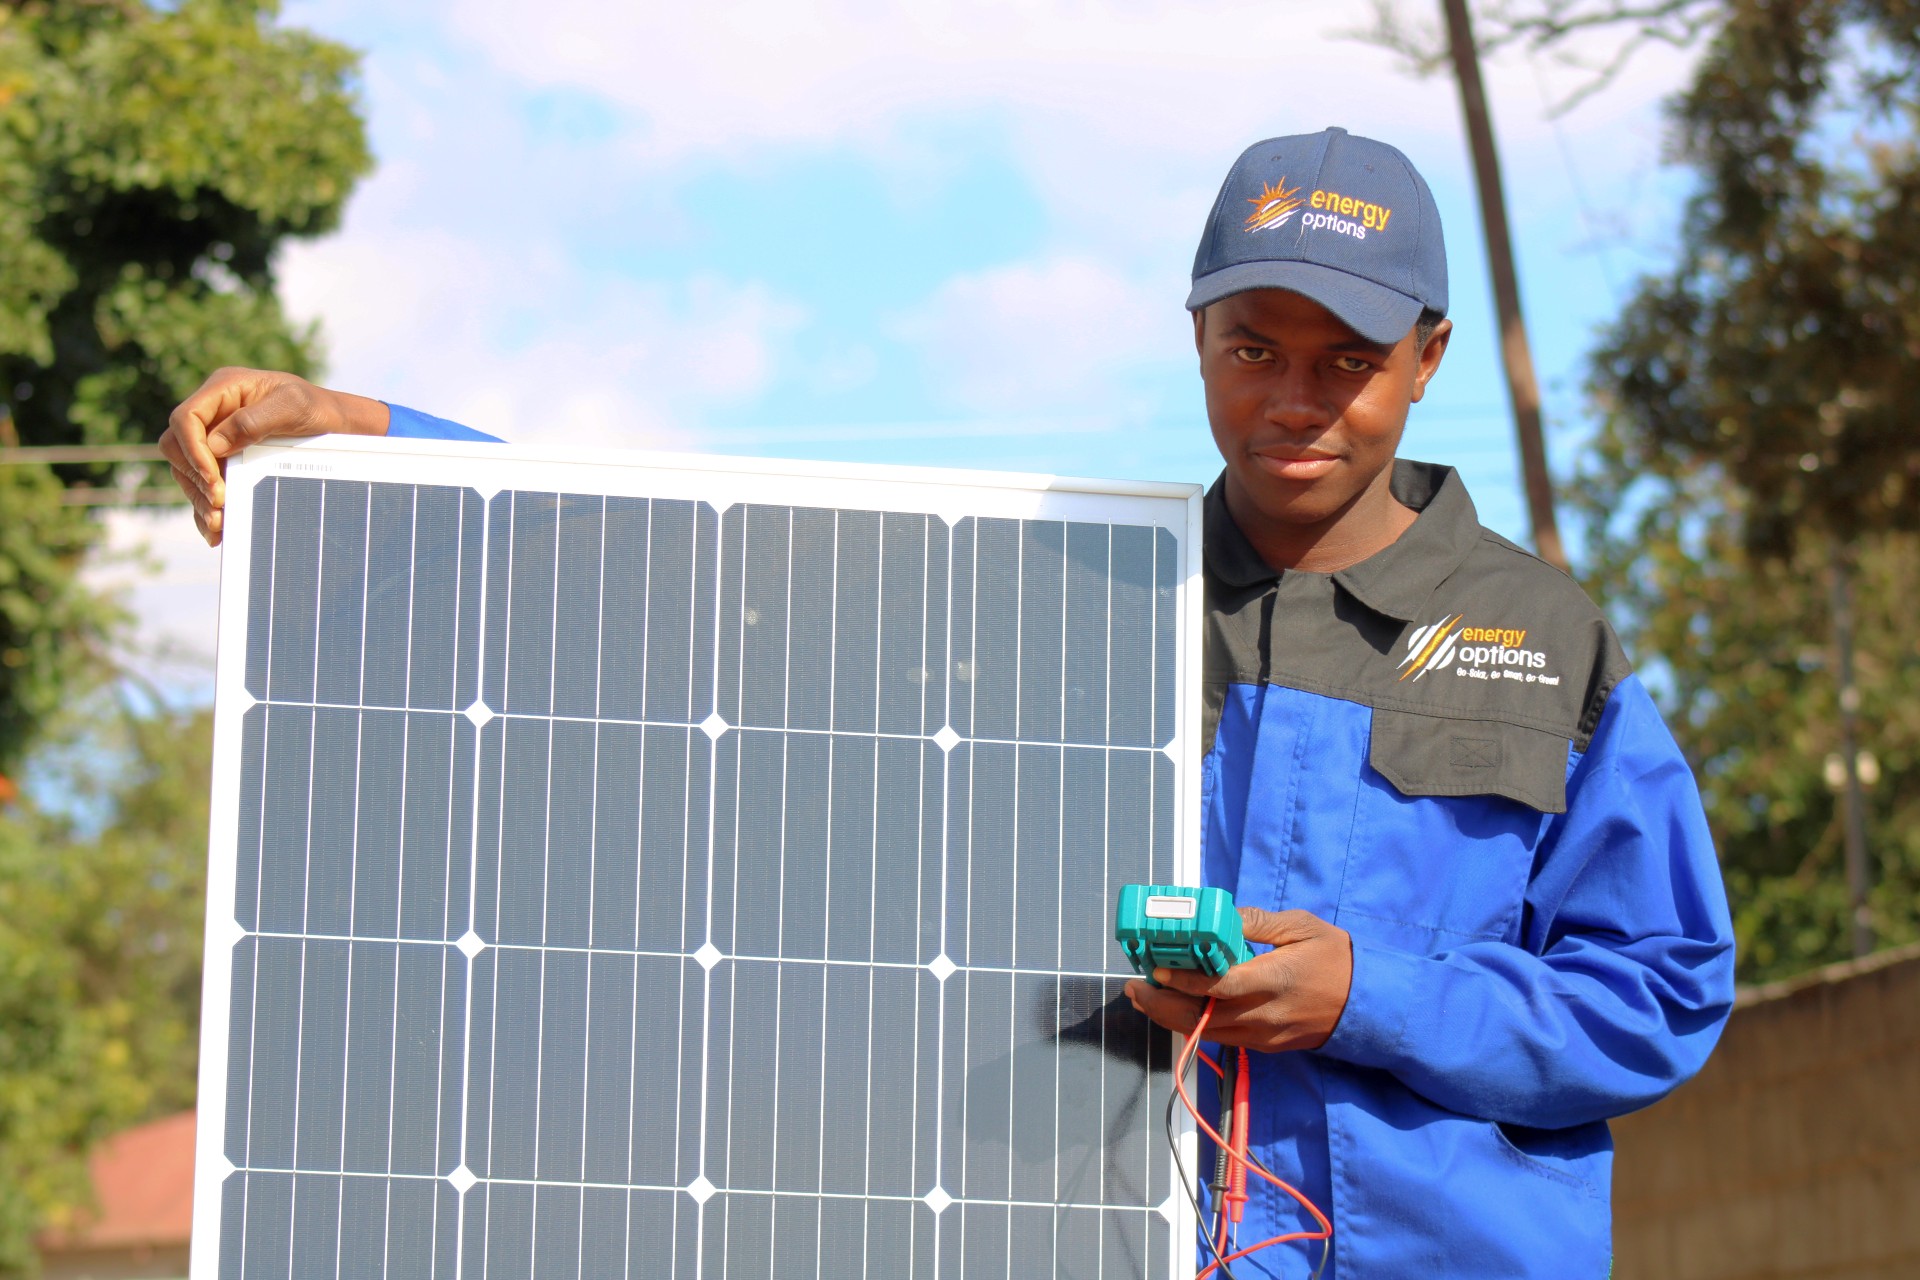 These Are The Most Common Solar Questions Asked By Business Owners - Answered by Energy Options